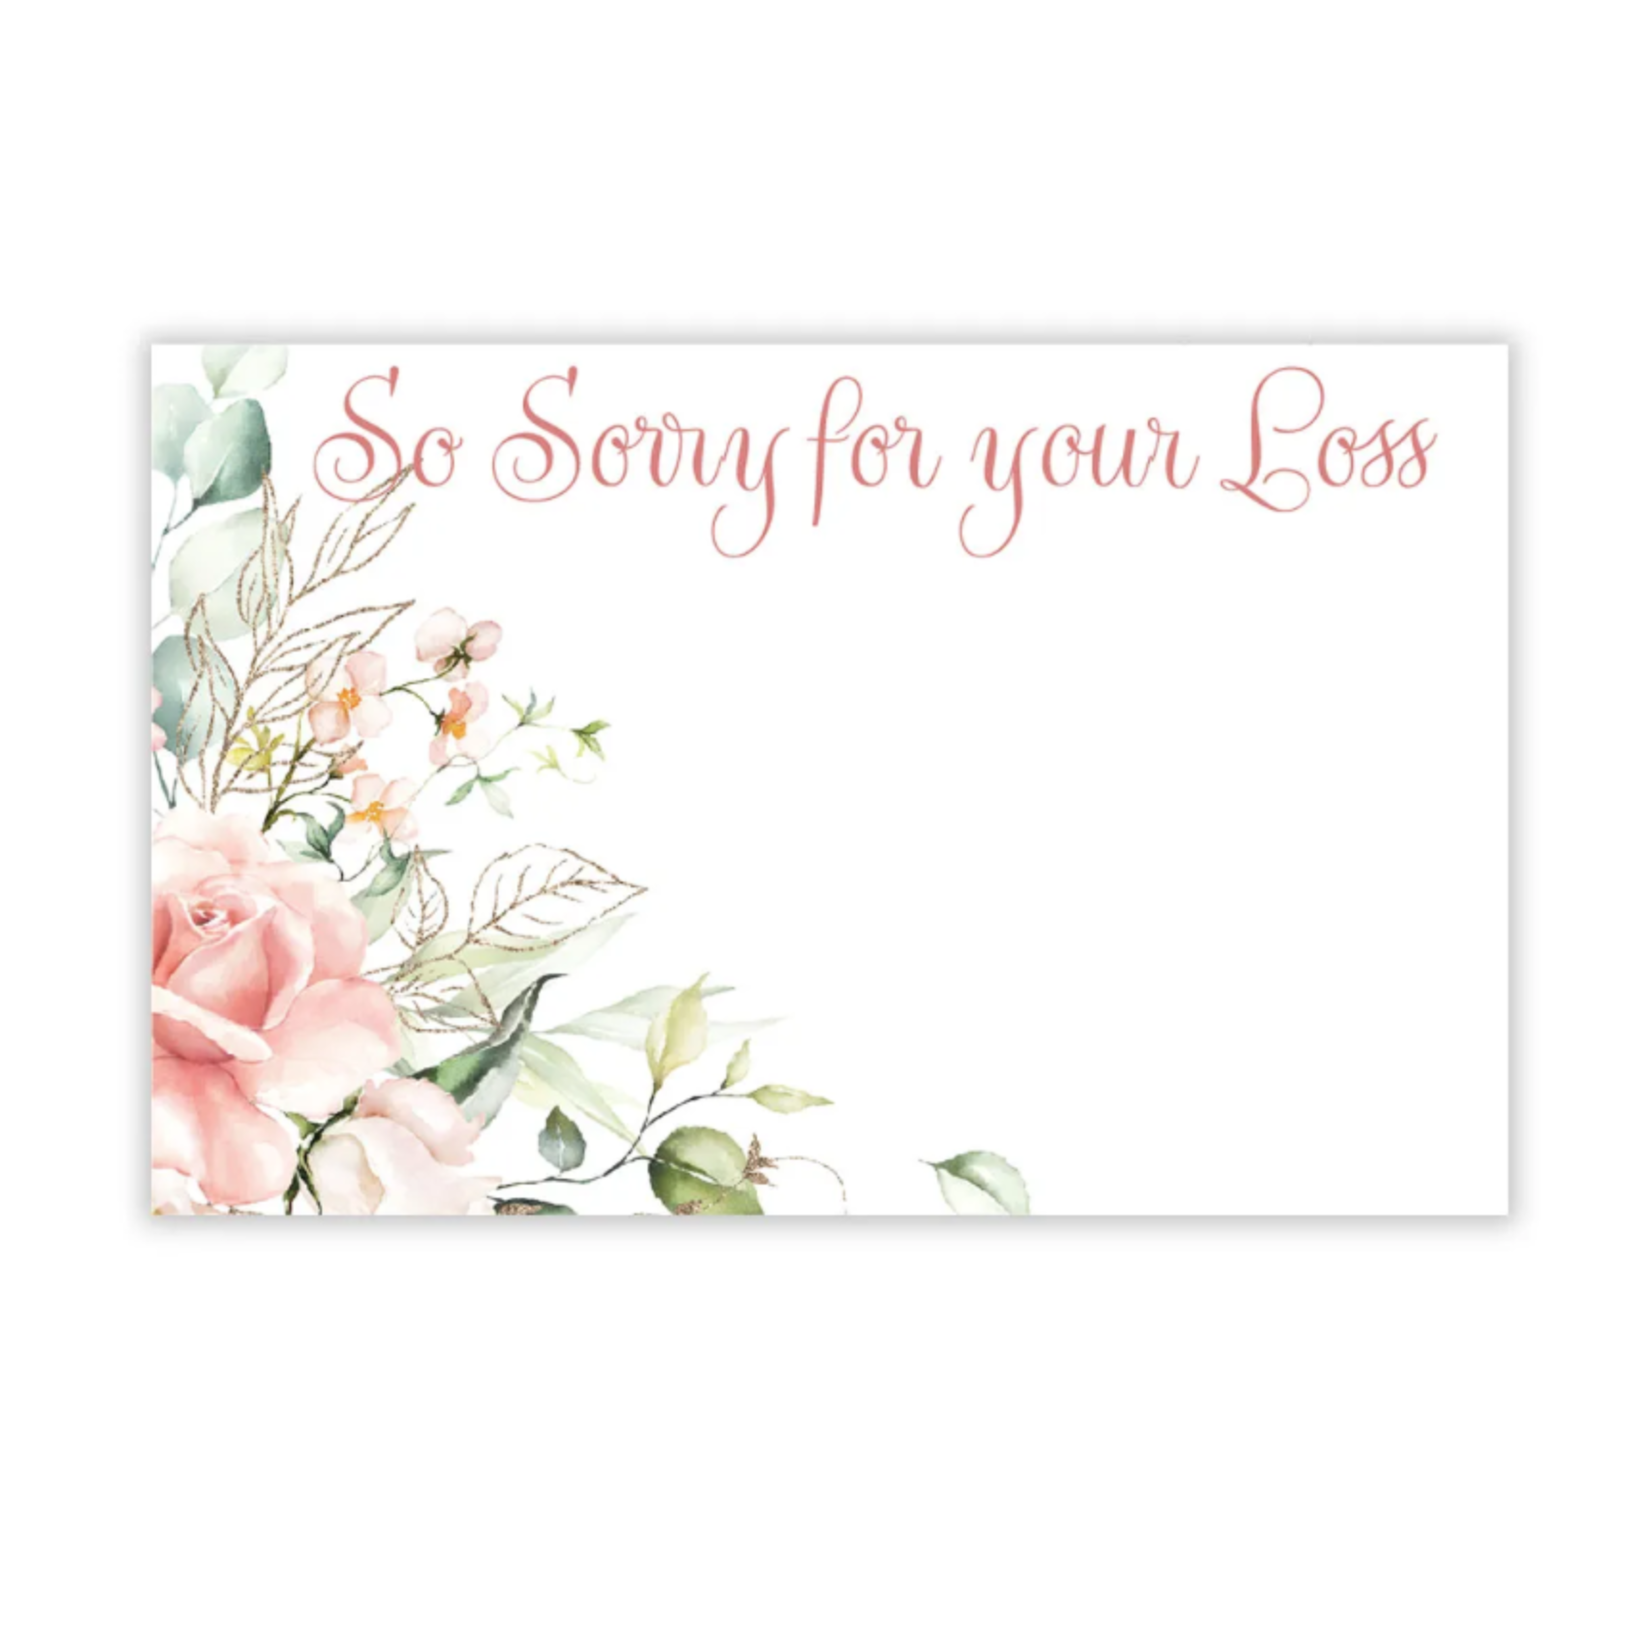 "SO SORRY FOR YOUR LOSS" CAPRI CARD